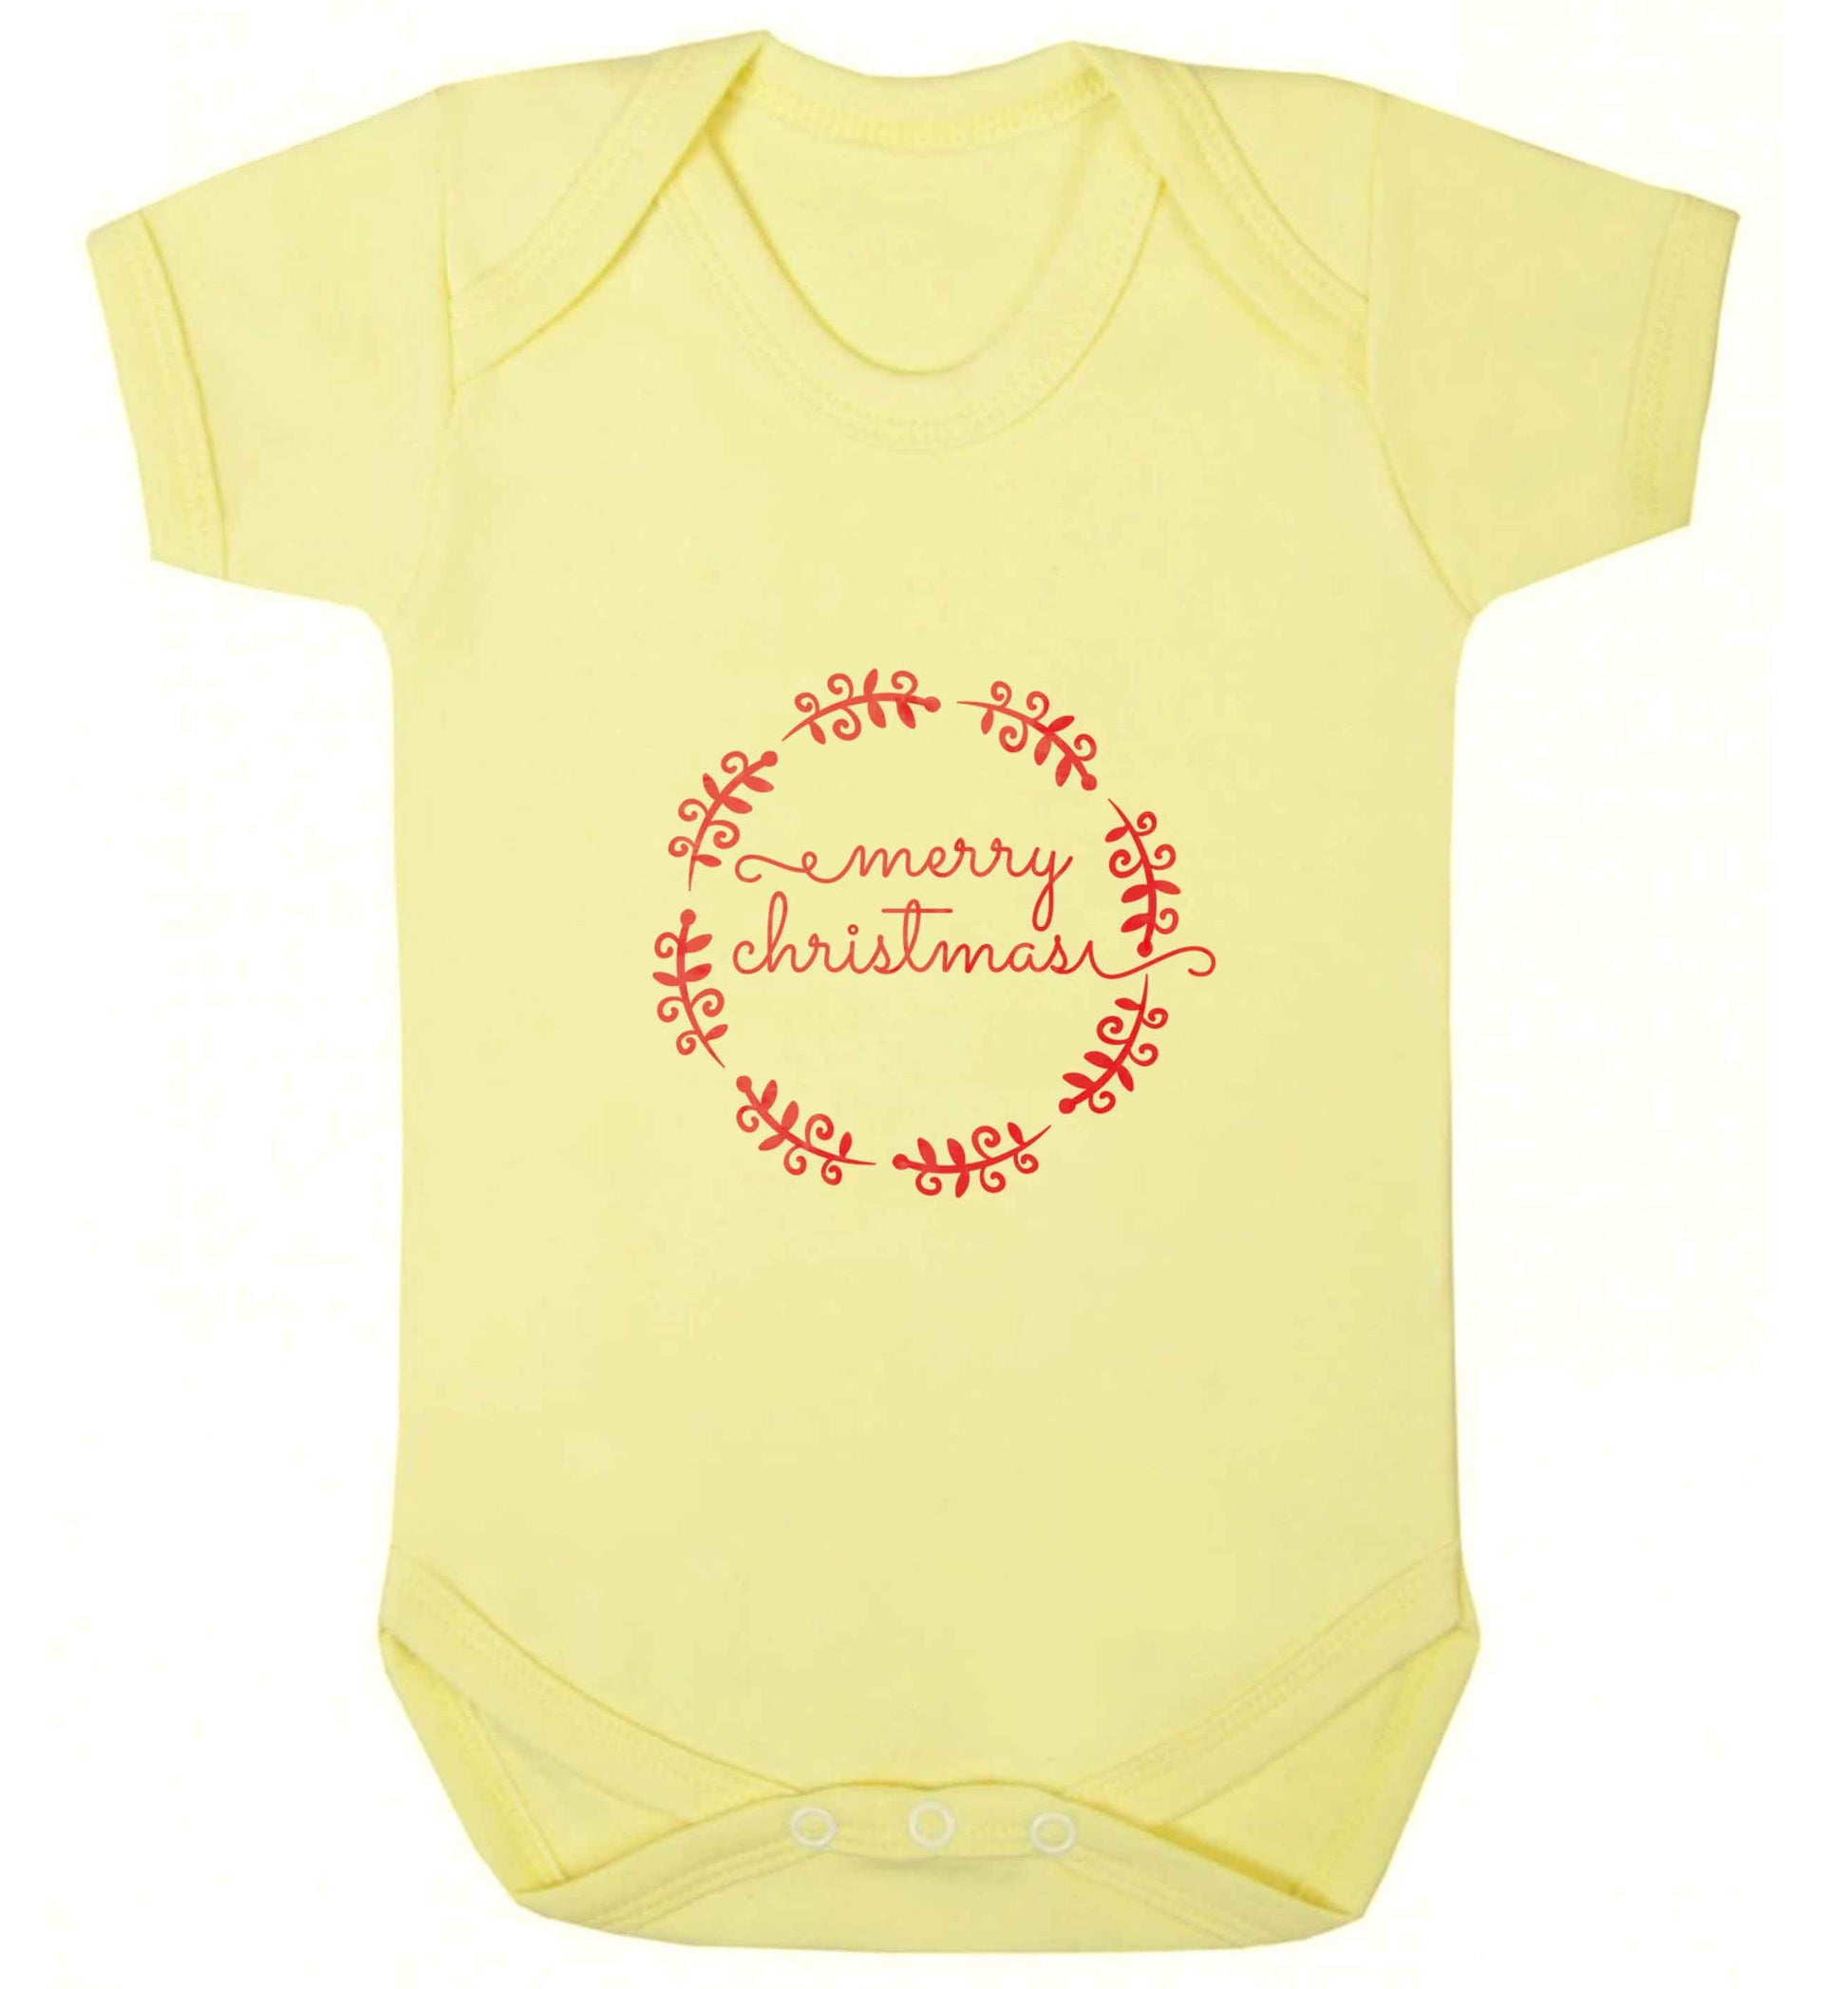 Merry christmas baby vest pale yellow 18-24 months